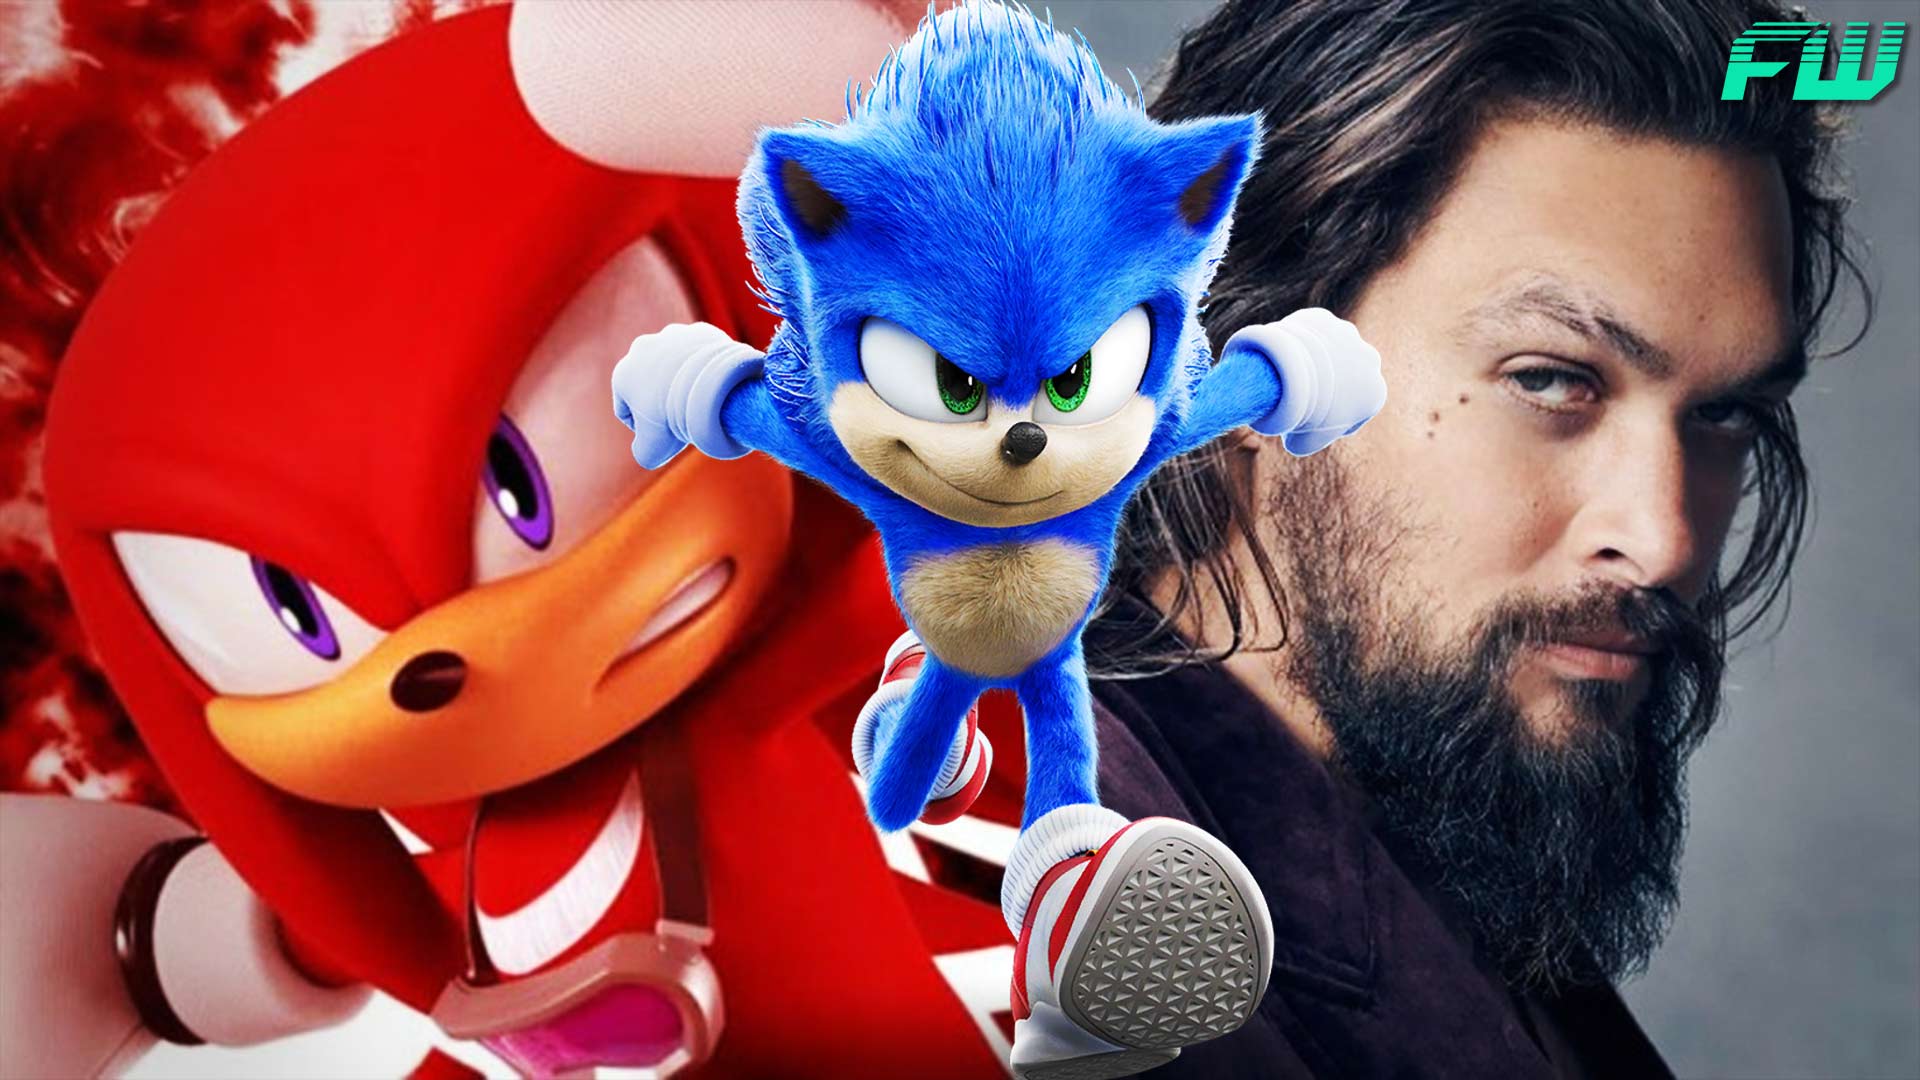 Cast Of Sonic The Hedgehog 2 Sonic Voice Sonic The Hedgehog 2 Knuckles Voice / Sonic The Hedgehog 2 Set Photo